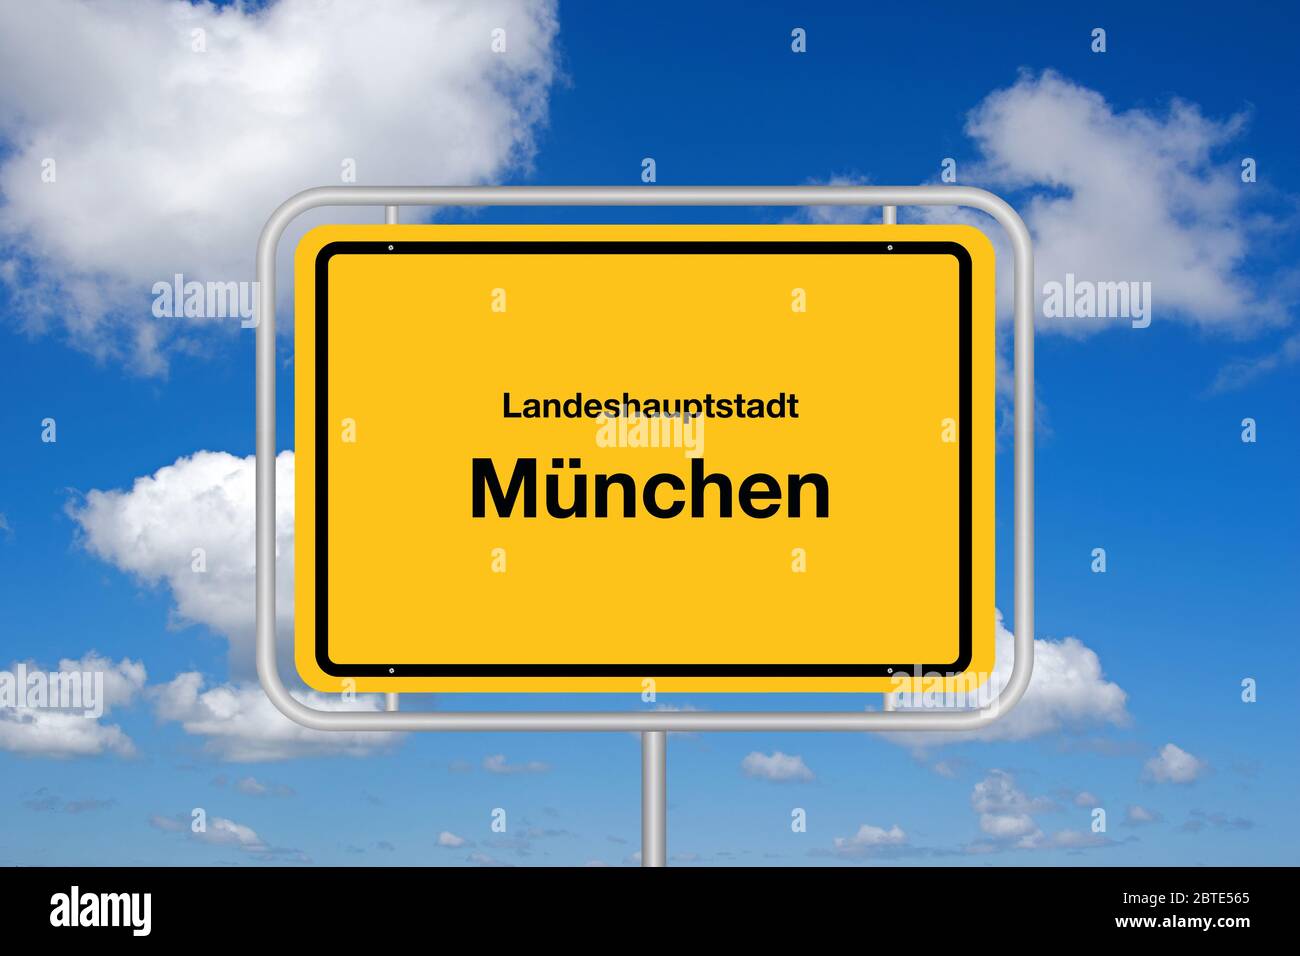 sity sign Landeshauptstadt Muenchen against blue sky, Germany, Bavaria, Muenchen Stock Photo